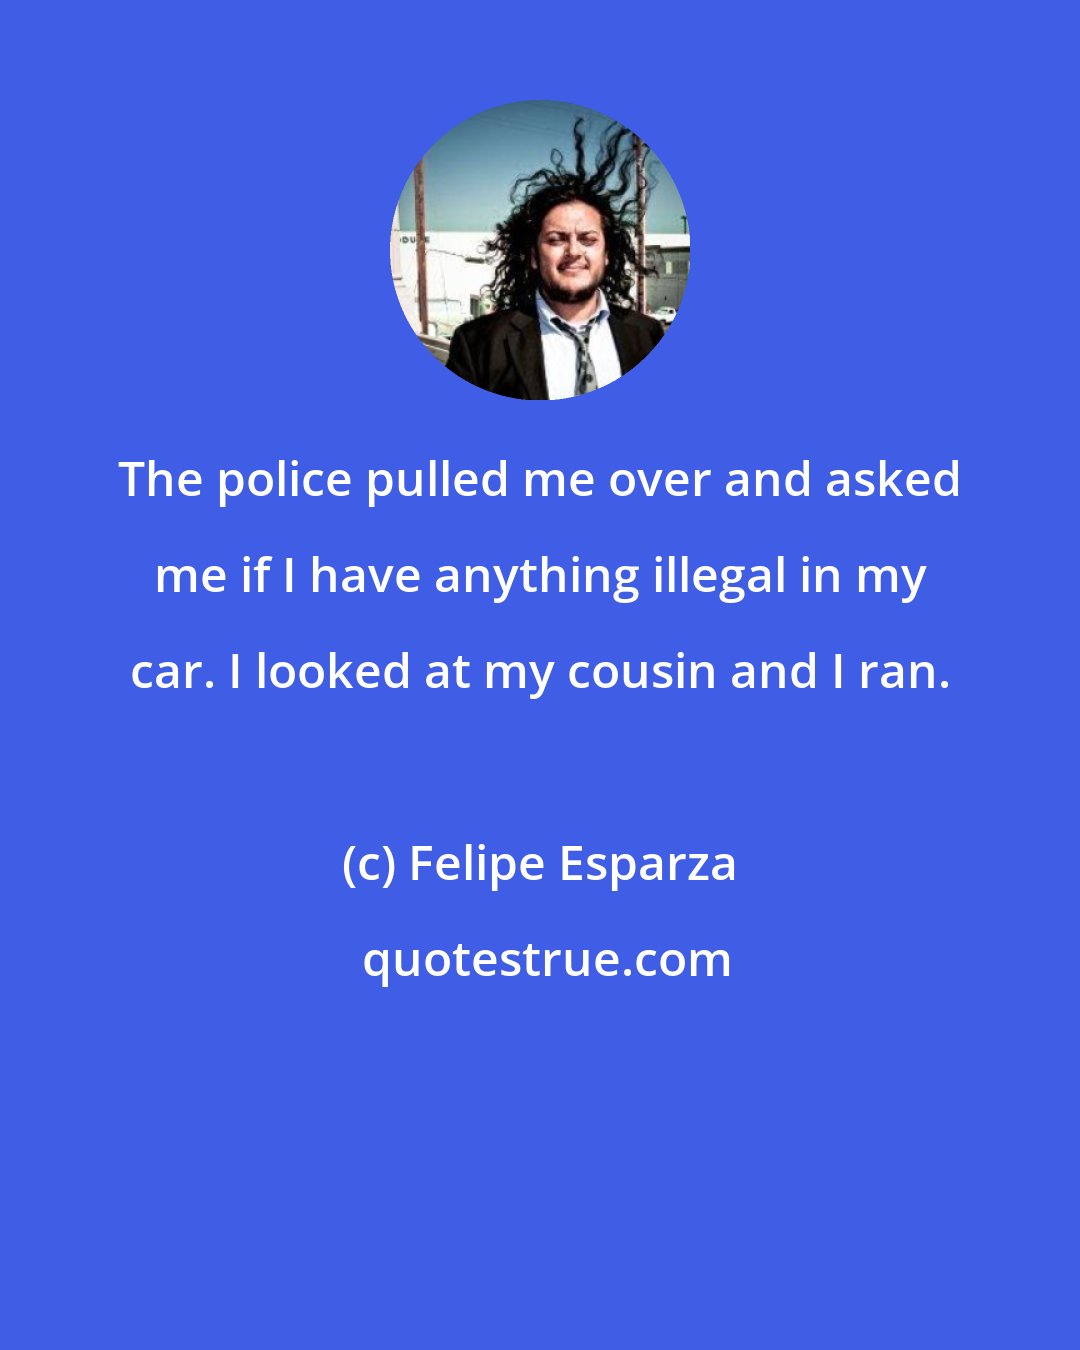 Felipe Esparza: The police pulled me over and asked me if I have anything illegal in my car. I looked at my cousin and I ran.